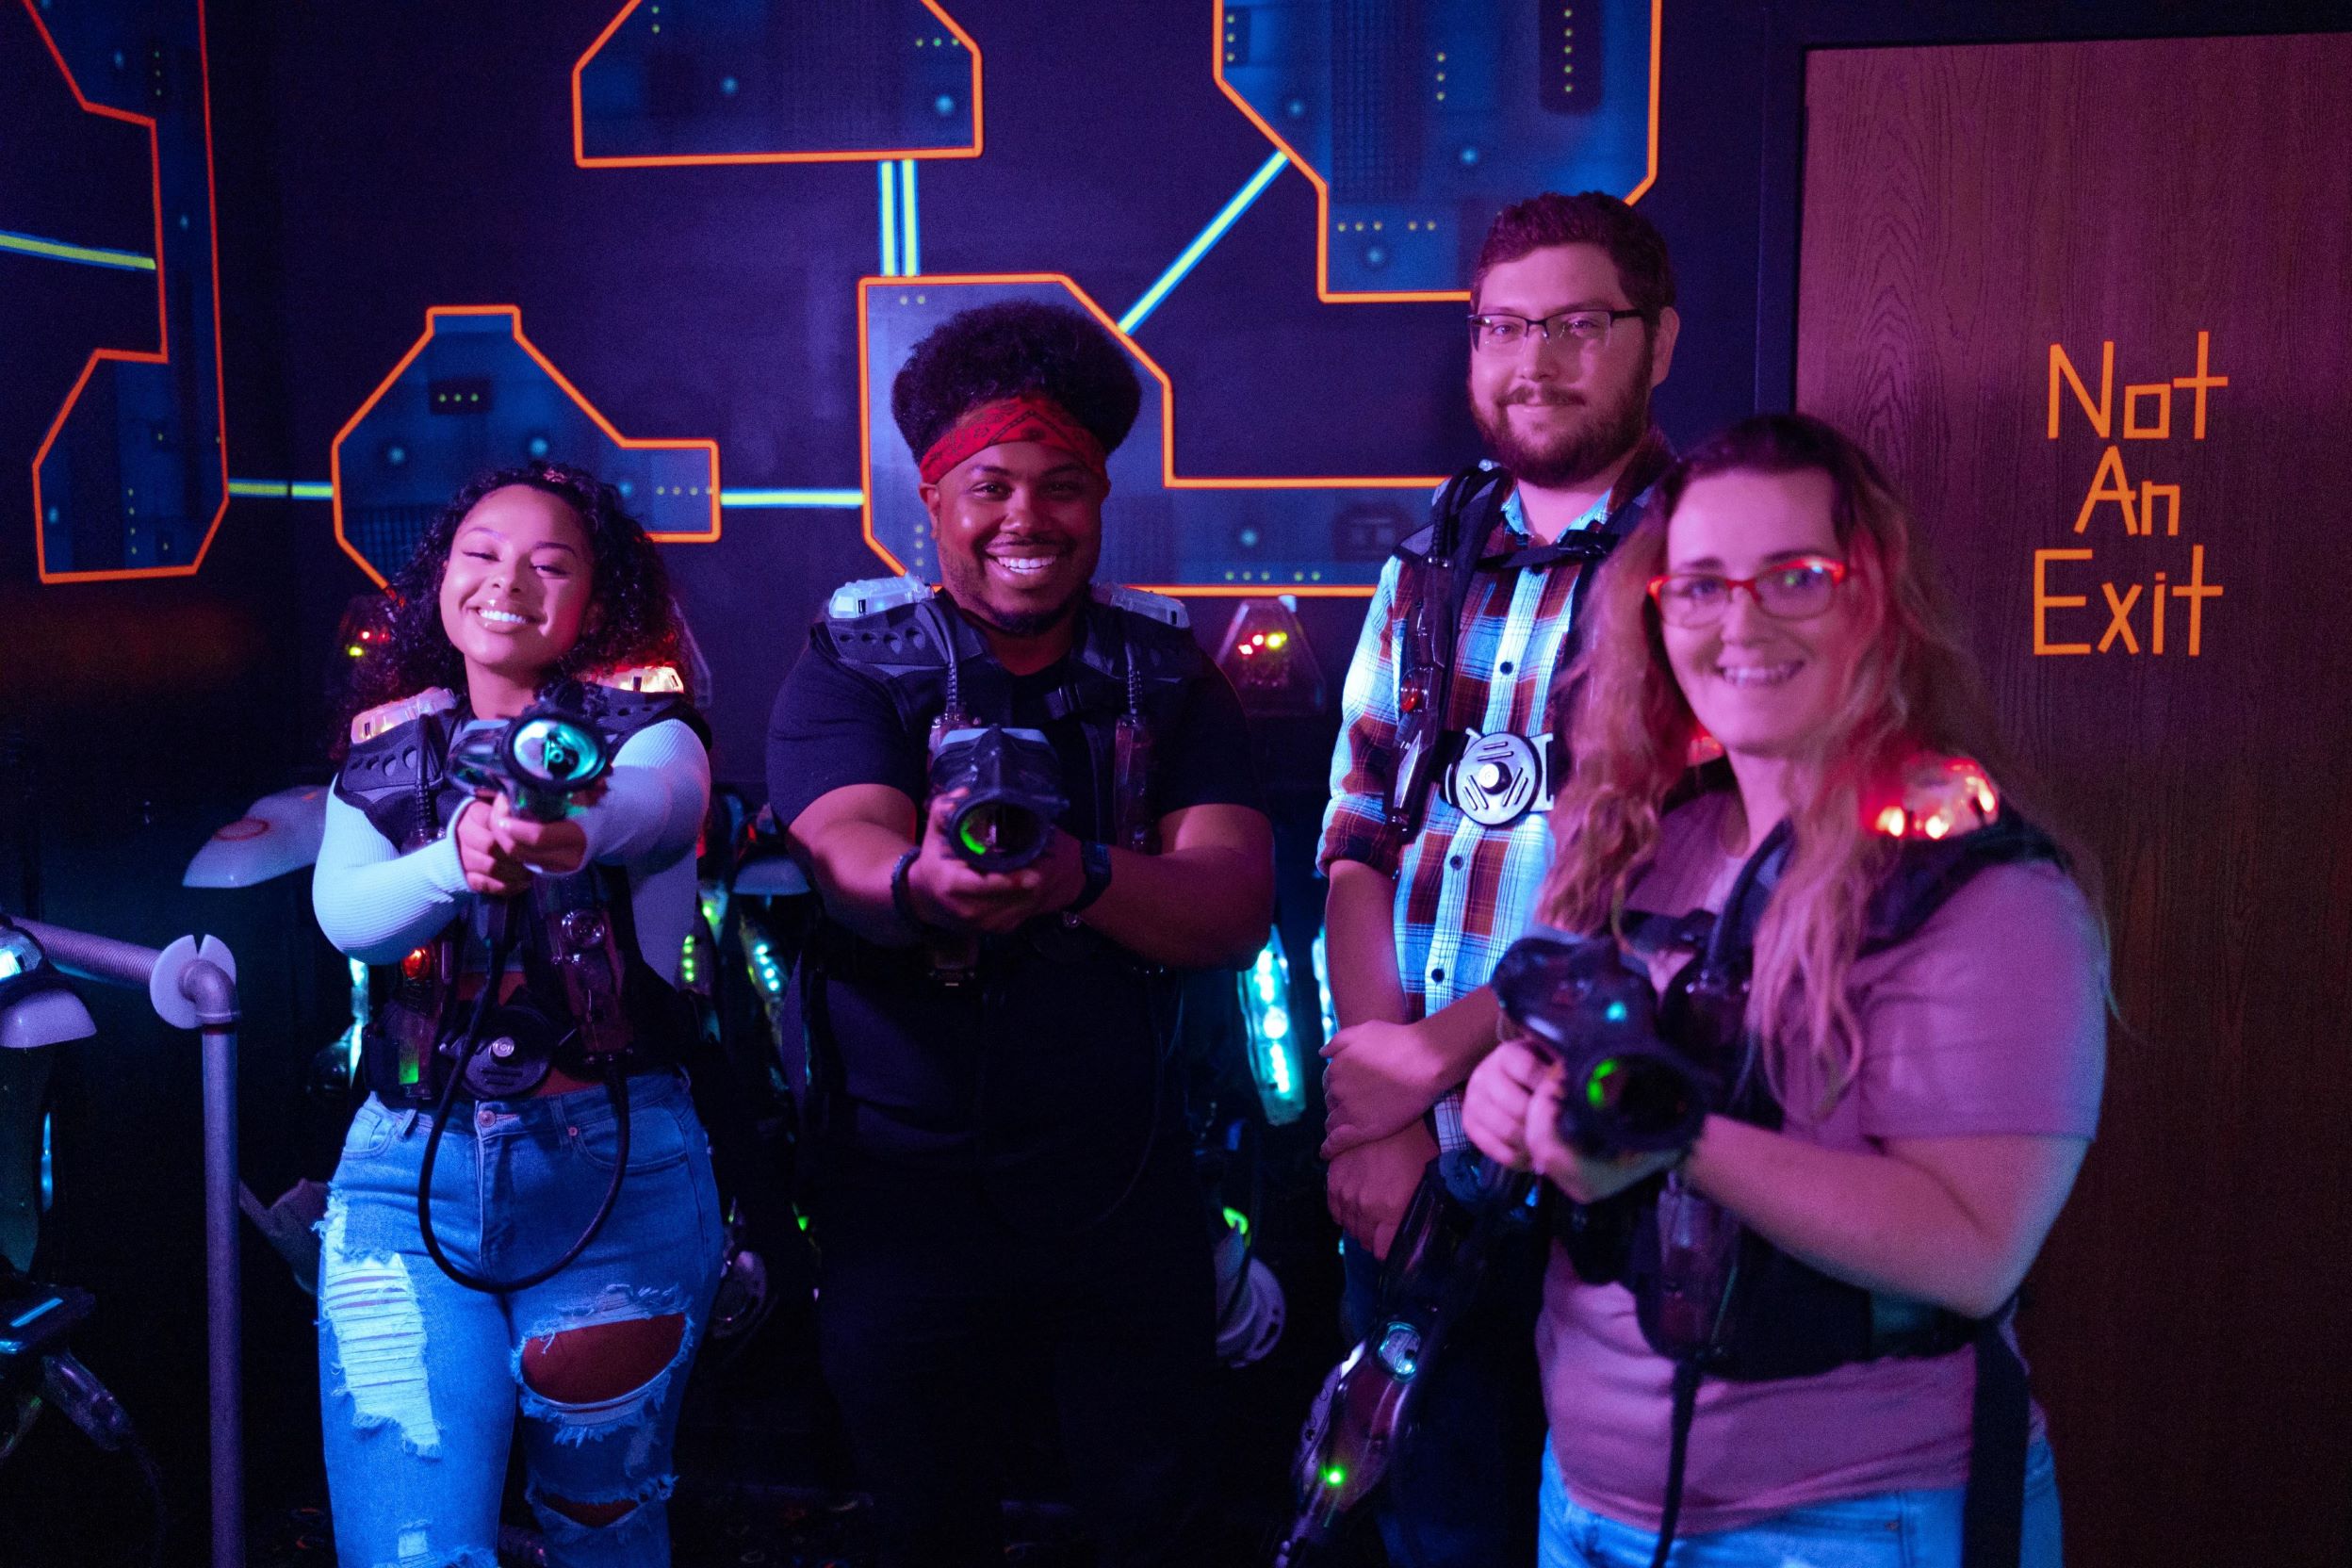 Four people wearing CyberBlast Pro laser tag gear and smiling at the camera.